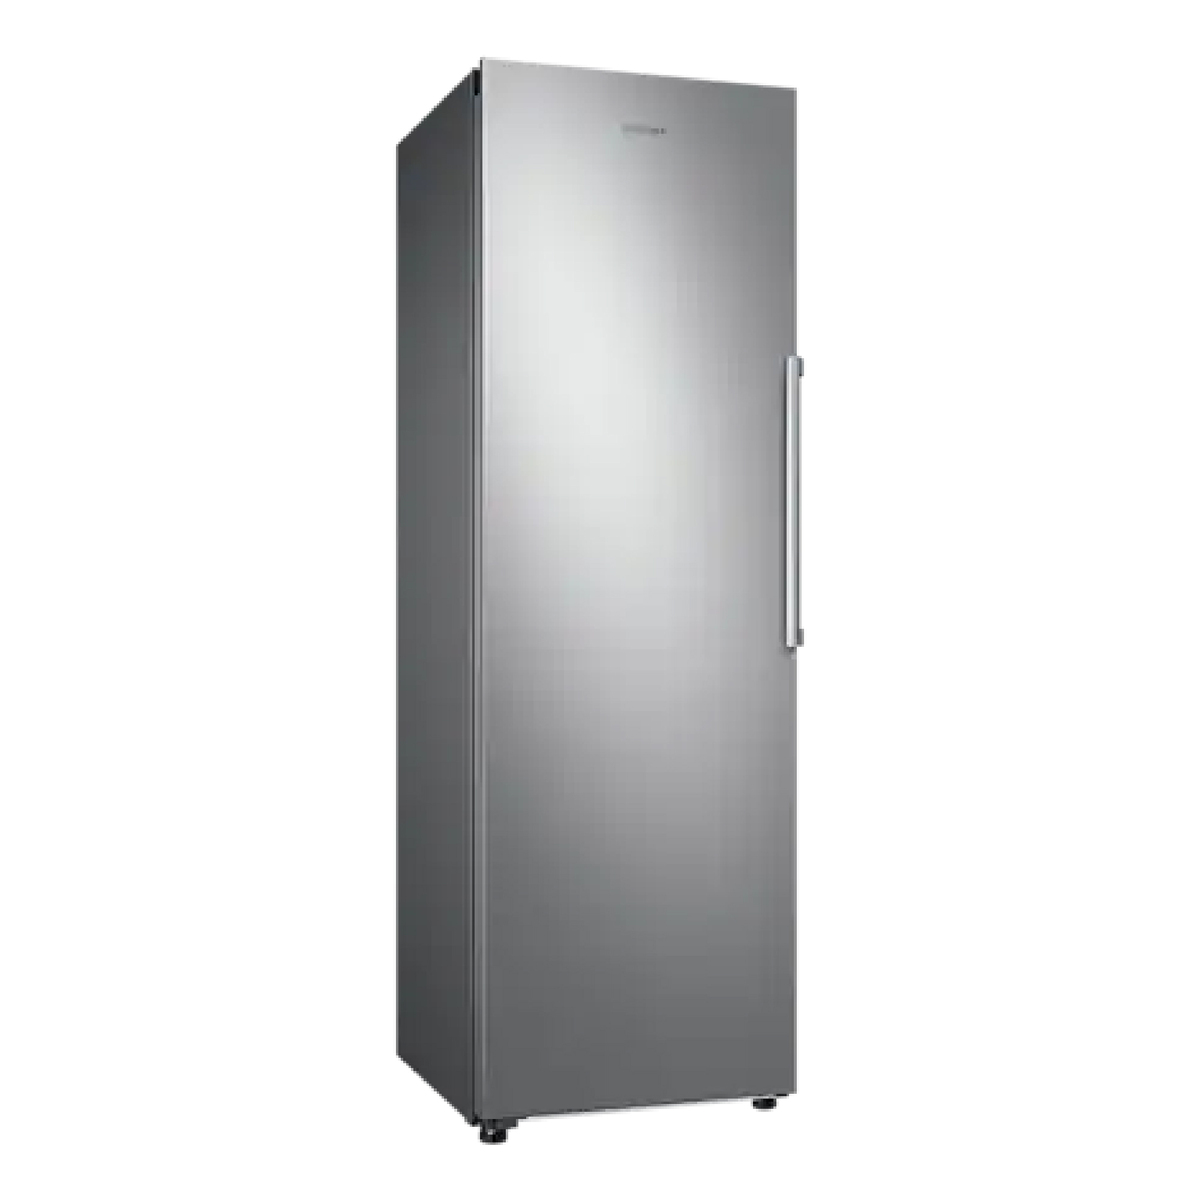 Samsung Upright Freezer with convertible mode RZ32M72407F/SG 330Ltr